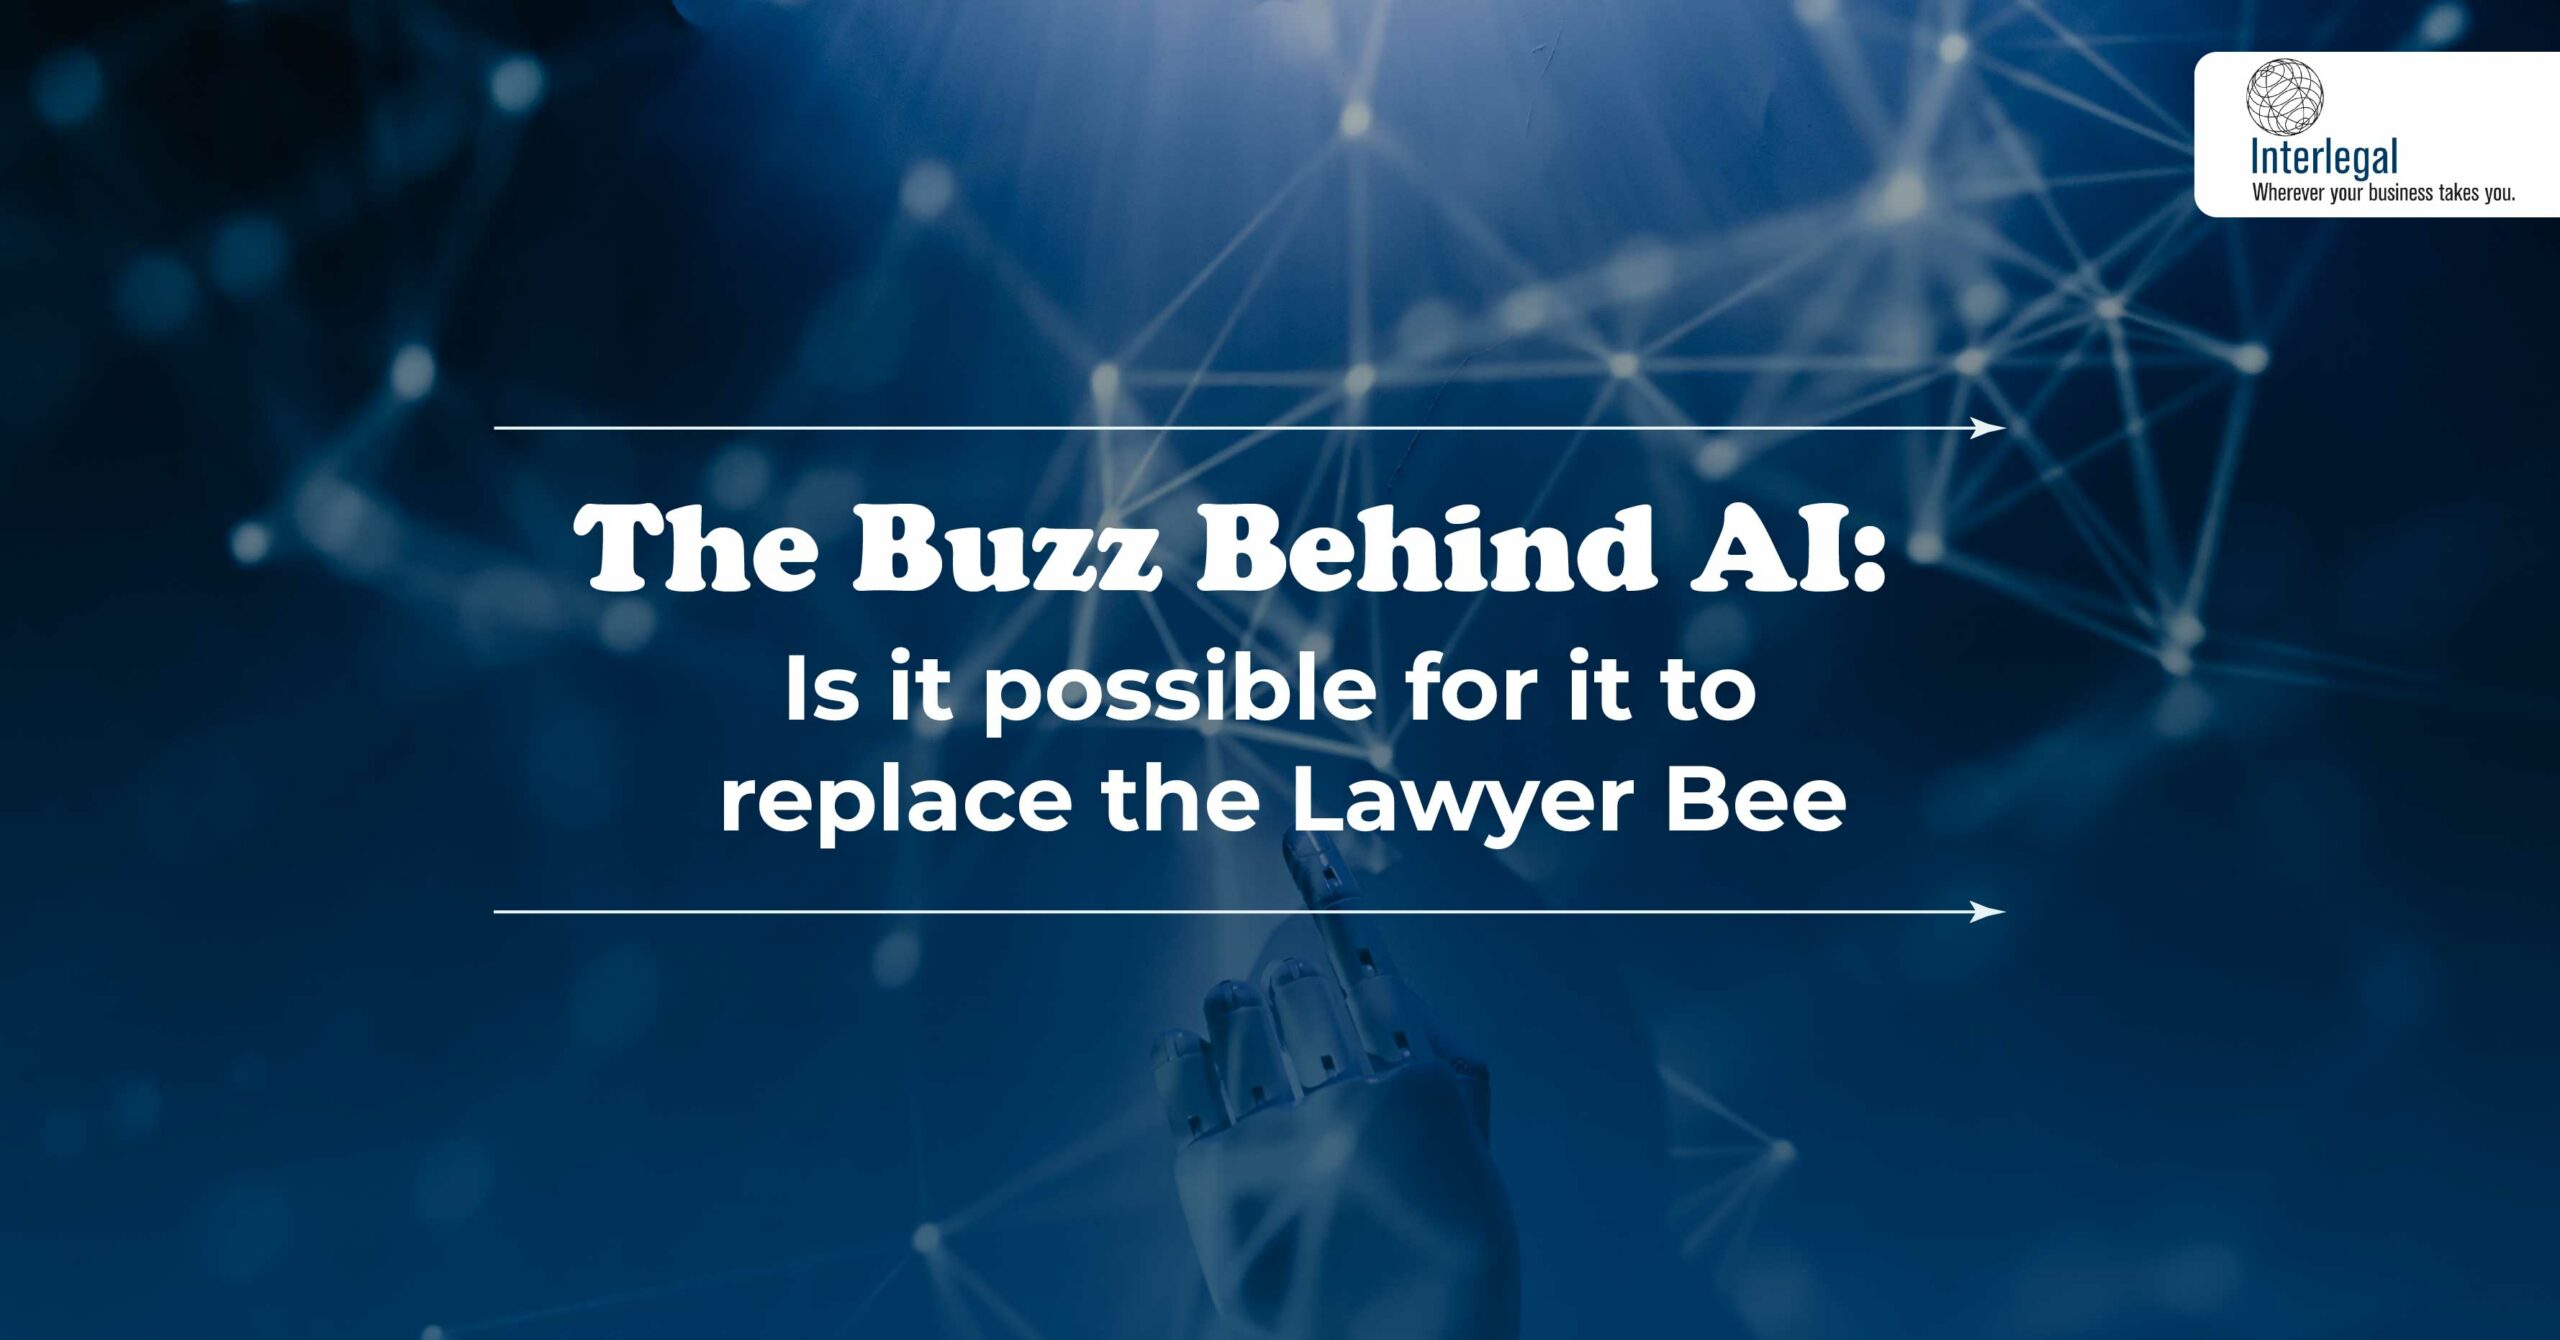 The Buzz Behind AI: Is it possible for it to Replace the Lawyer Bee